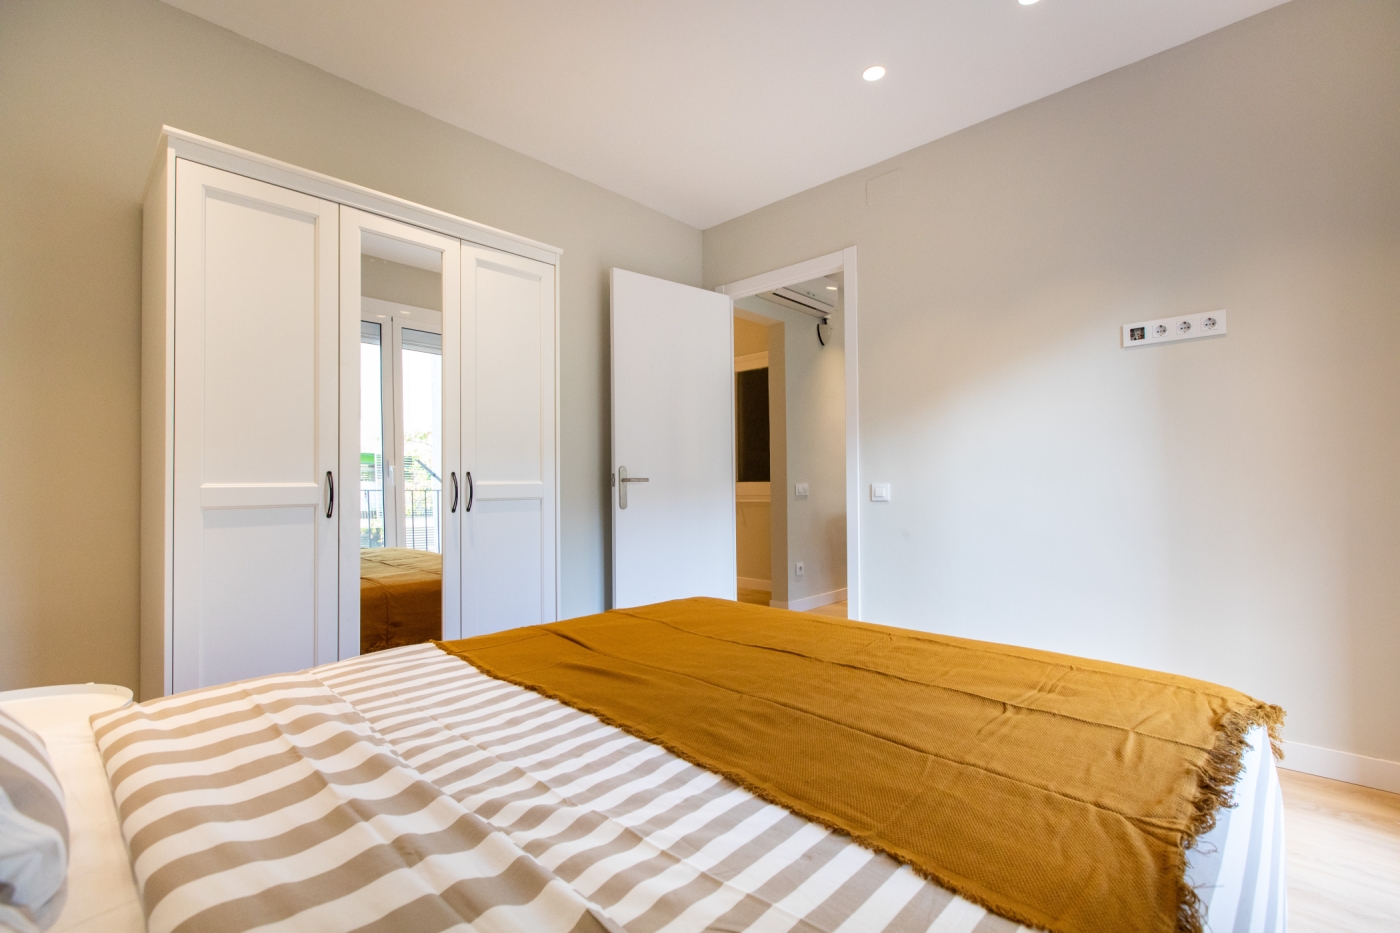 NEWLY RENOVATED APARTMENT BEHIND THE DIAGONAL ILLA in BARCELONA